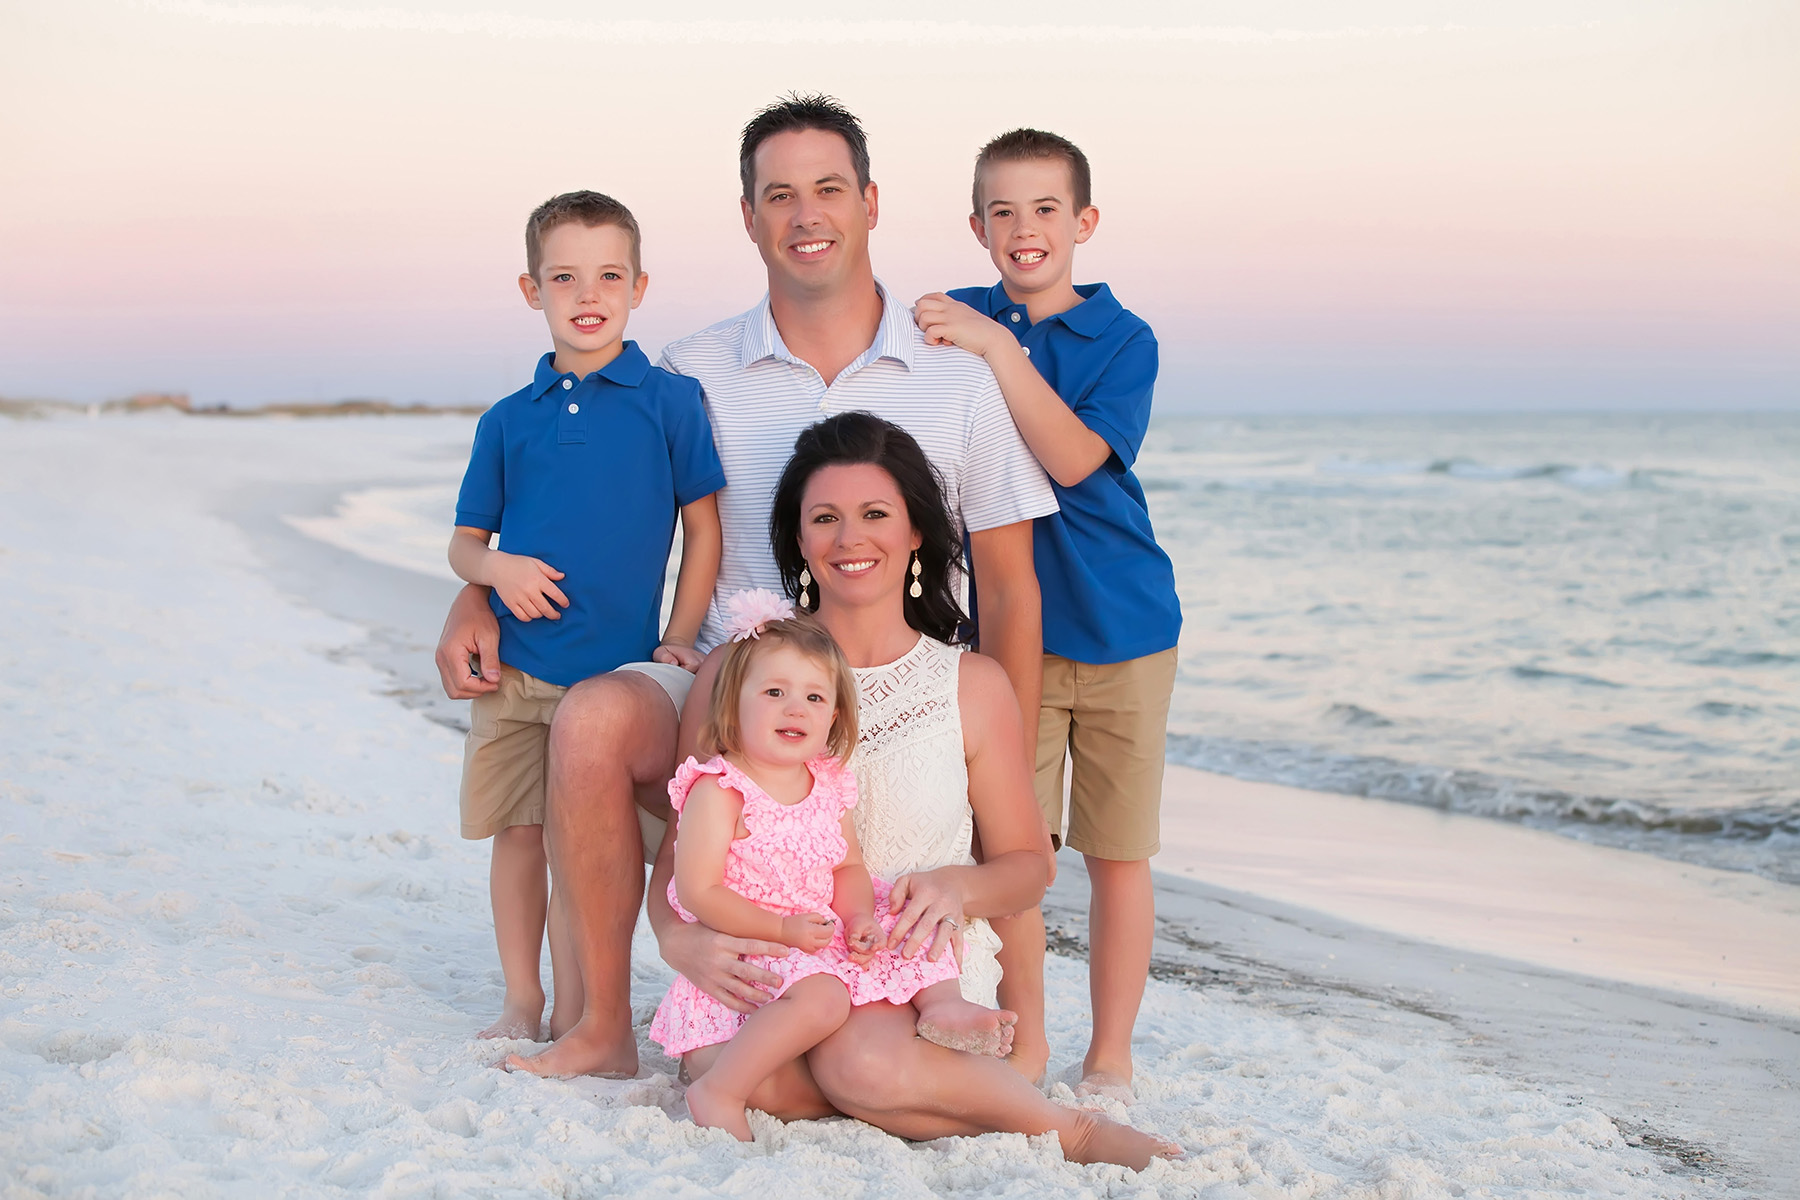 Destin Photography by Tiffany Sims Photography #destin #destinphotography #destinbeachphotography #30aphotography #30abeachphotography #destinphotographer #30aphotographer #fortwaltonbeachphotography #okaloosaislandphotography | Destin Photography Okaloosa Island Ratliff Family 2